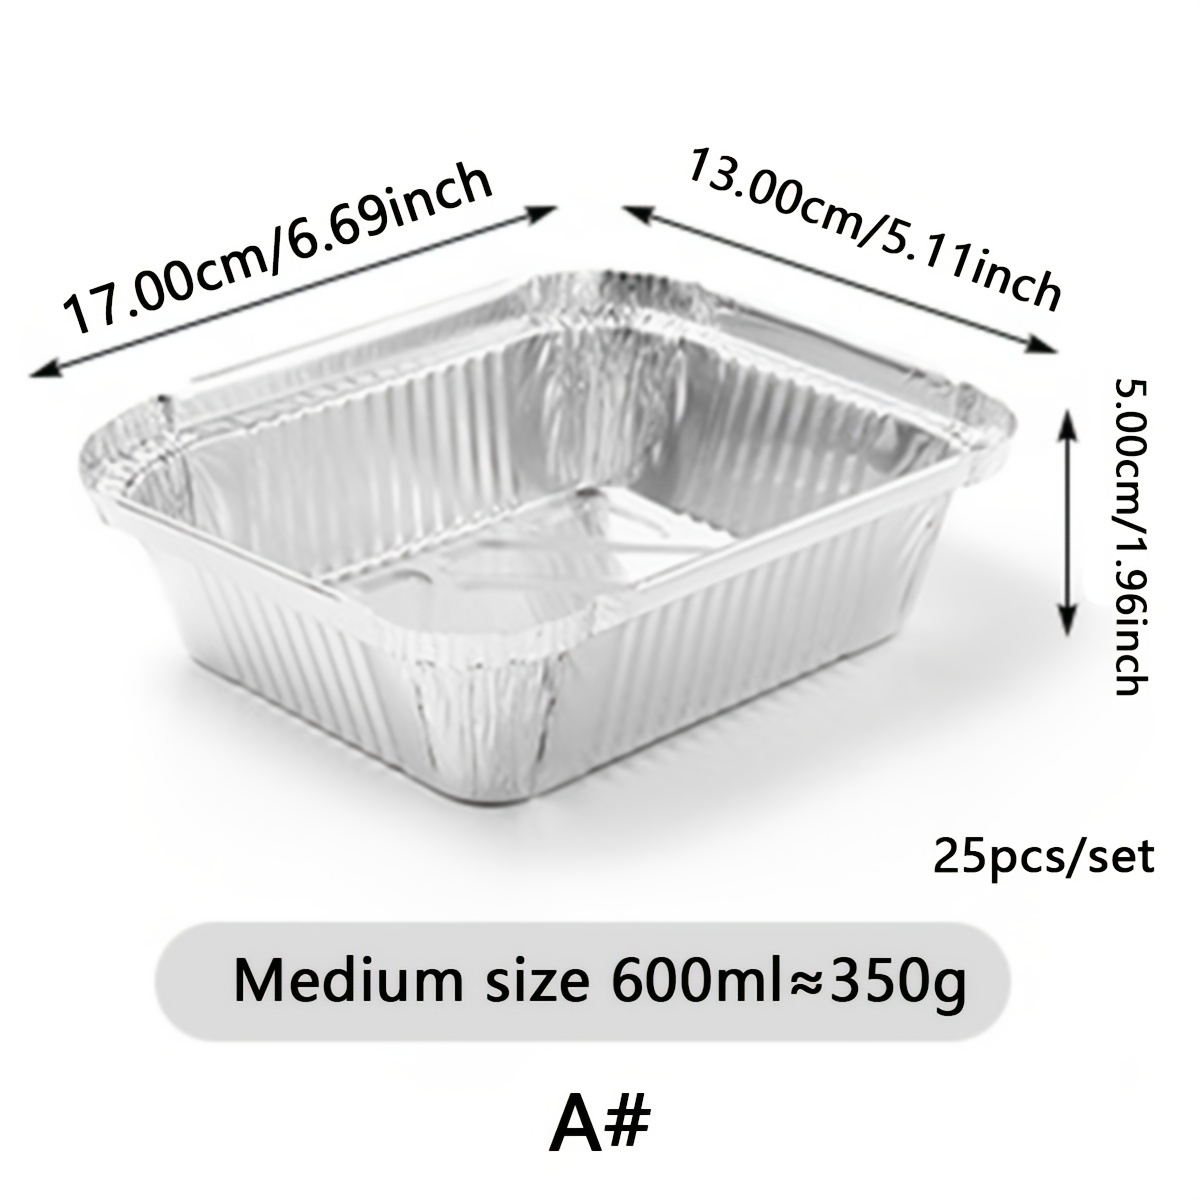 Aluminum Pans Cookie Sheet Baking Pans, Disposable Aluminum Foil Trays -Durable Nonstick Baking Sheets,for Picnic or Taking Food on A Day Trip 50pcs